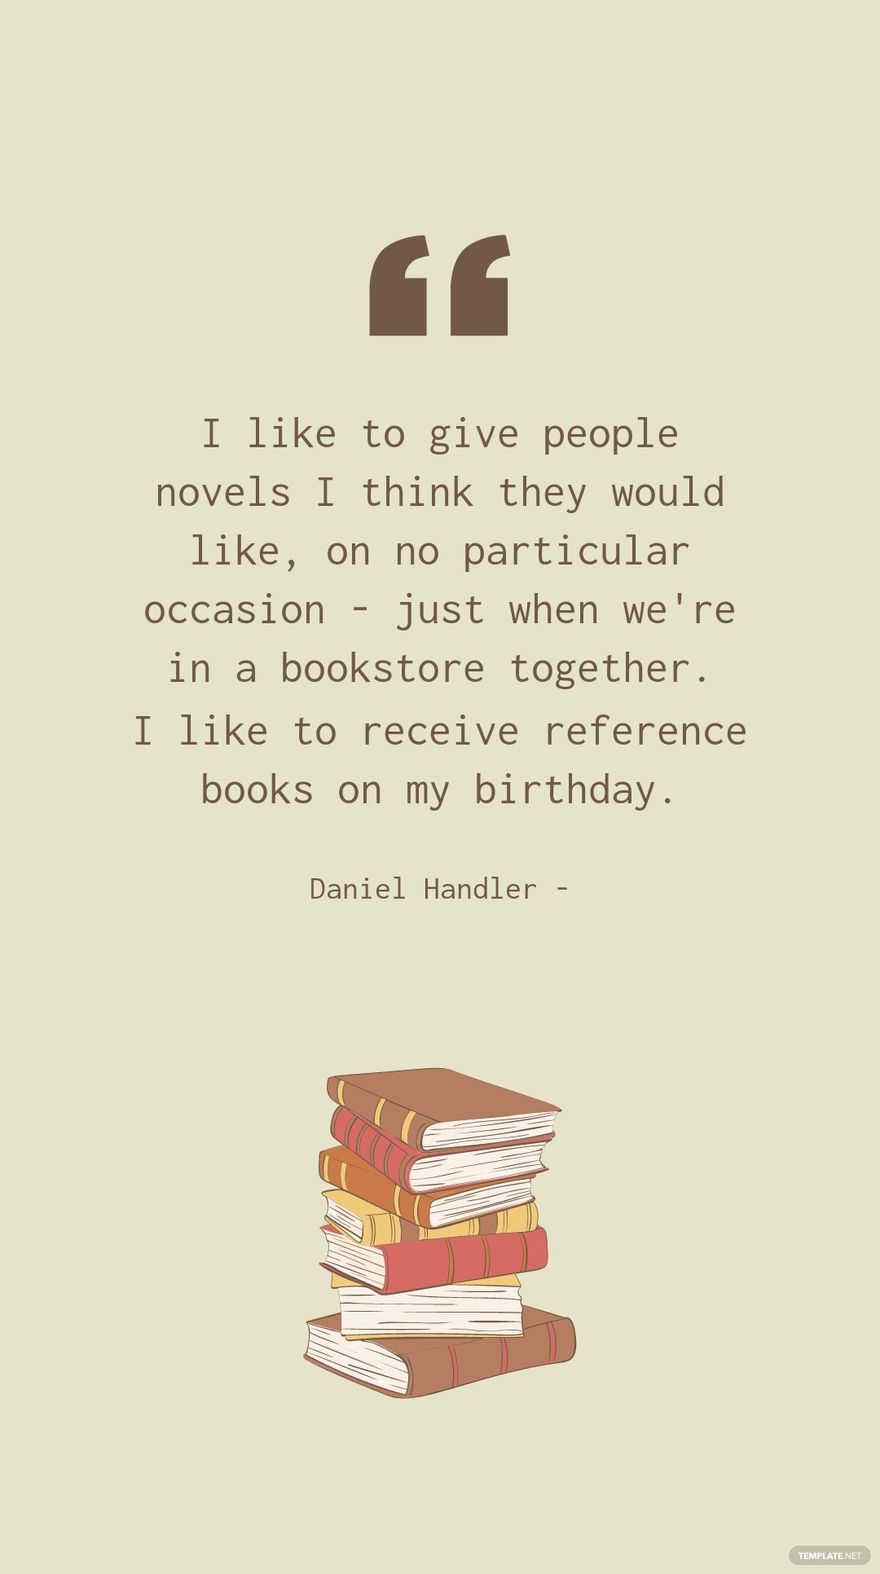 Daniel Handler - I like to give people novels I think they would like, on no particular occasion - just when we're in a bookstore together. I like to receive reference books on my birthday.